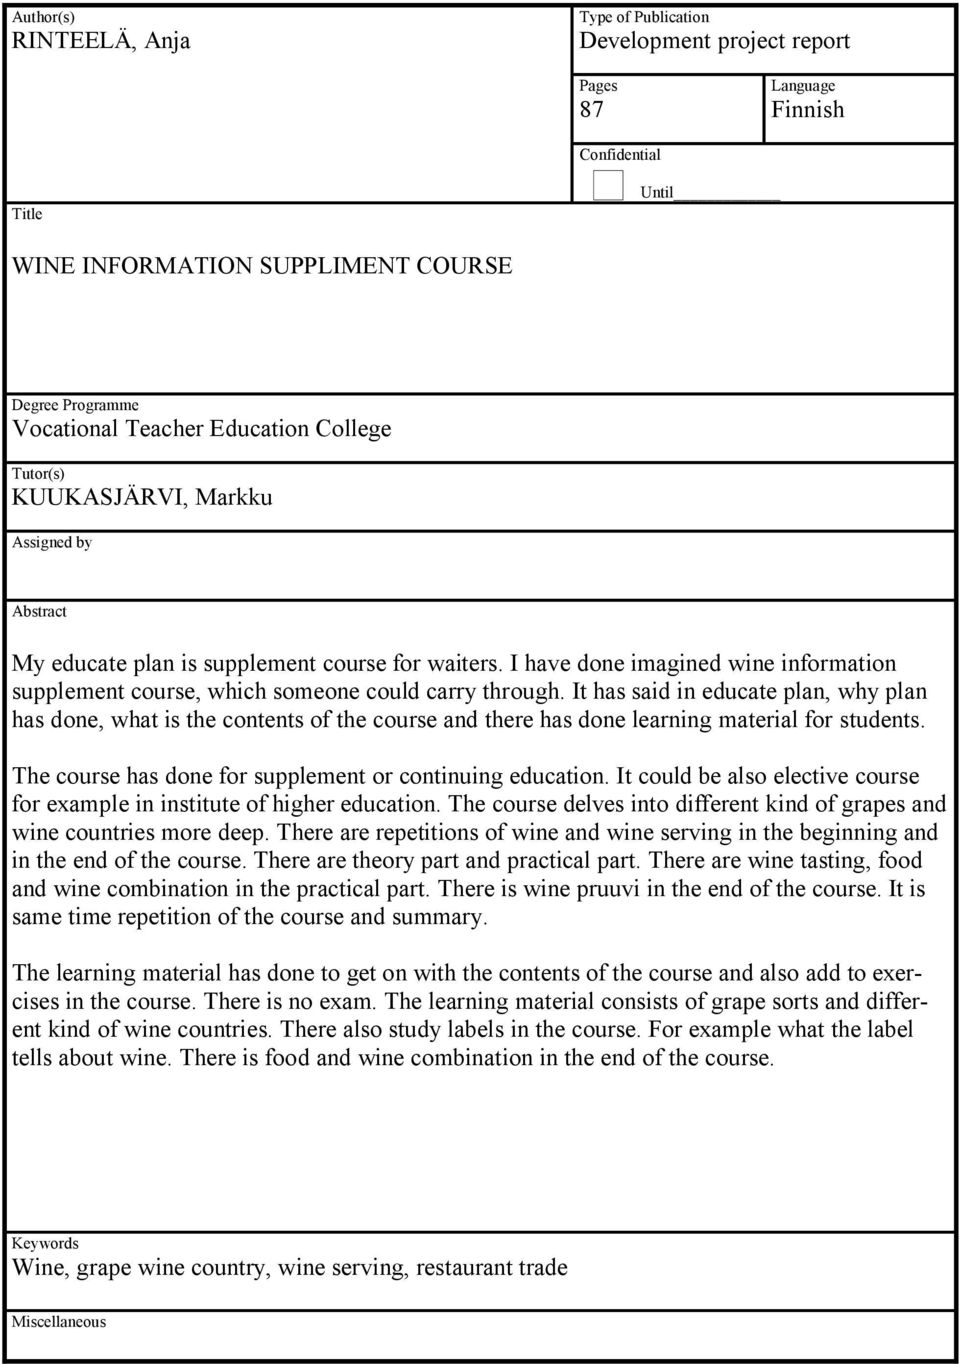 I have done imagined wine information supplement course, which someone could carry through.